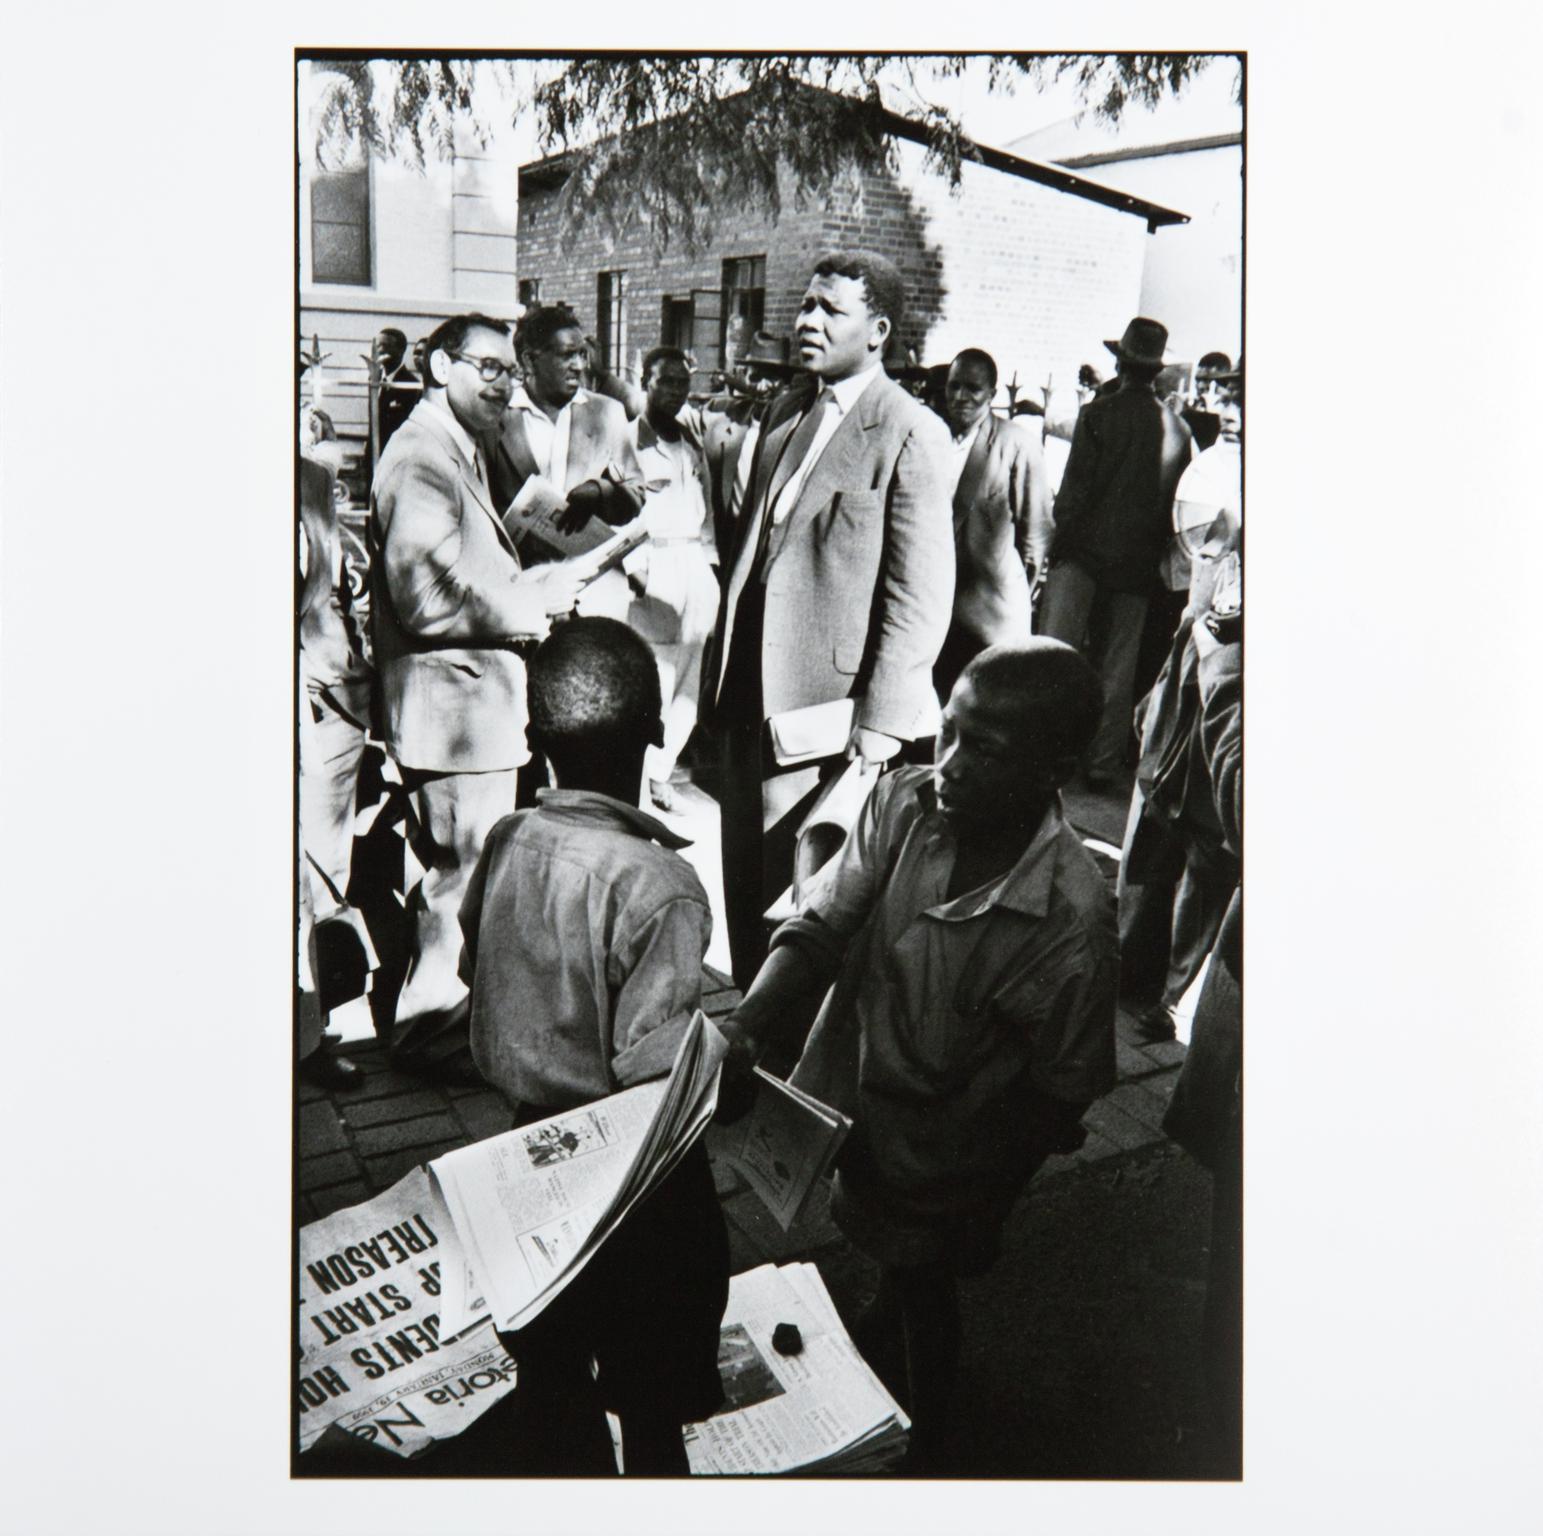 Nelson Mandela, then acting as a defense lawyer, outside the Drill Hall, during the Treason Trial